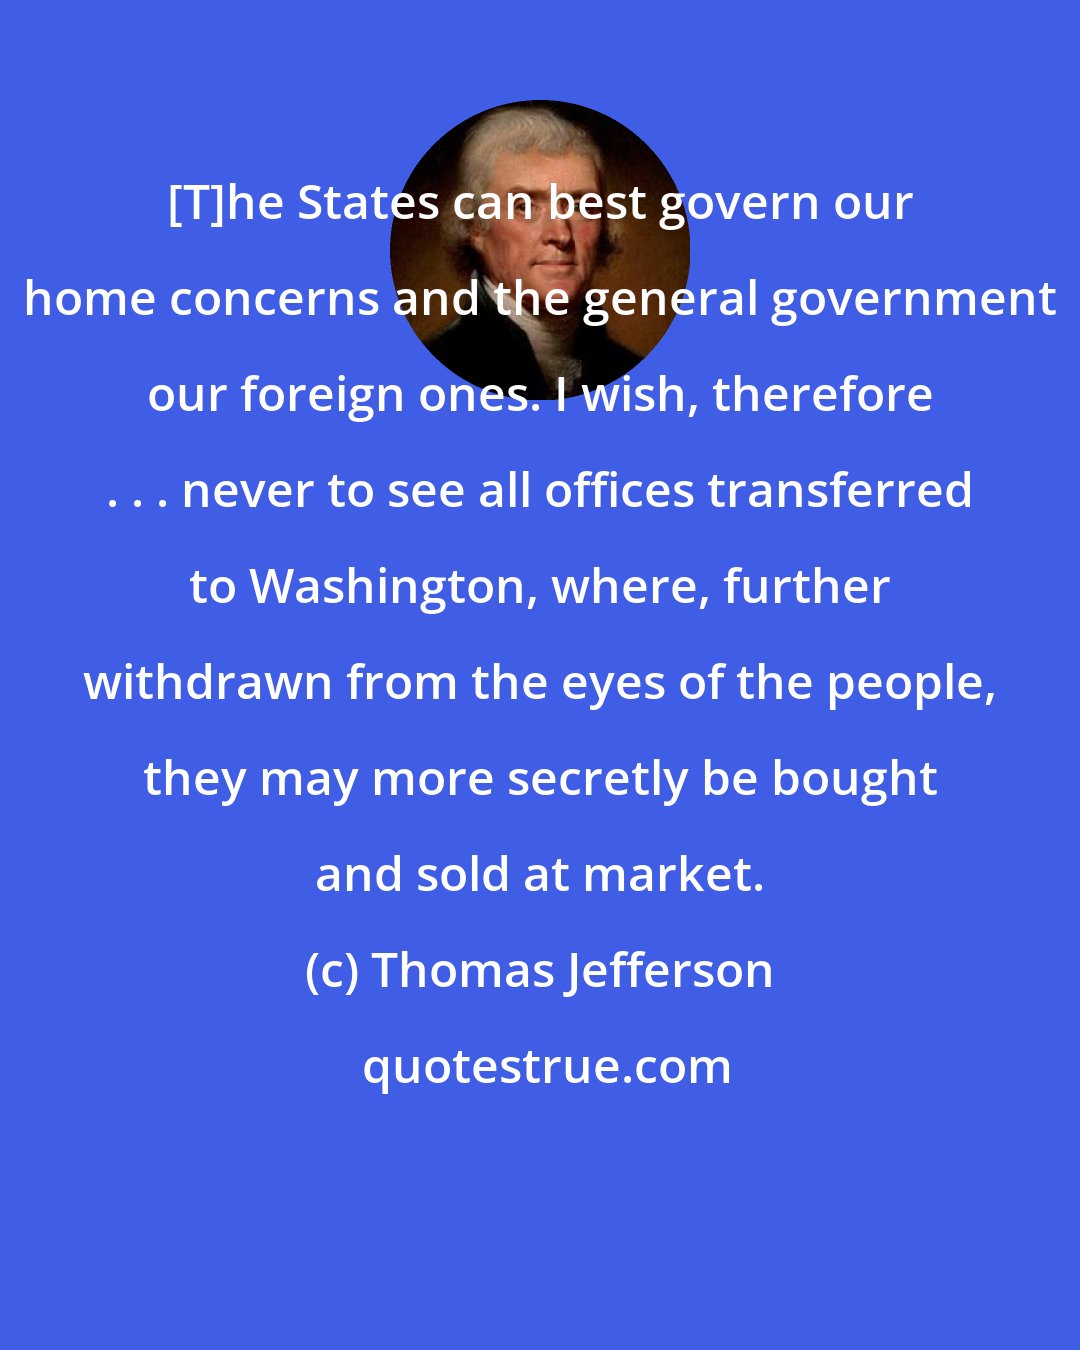 Thomas Jefferson: [T]he States can best govern our home concerns and the general government our foreign ones. I wish, therefore . . . never to see all offices transferred to Washington, where, further withdrawn from the eyes of the people, they may more secretly be bought and sold at market.